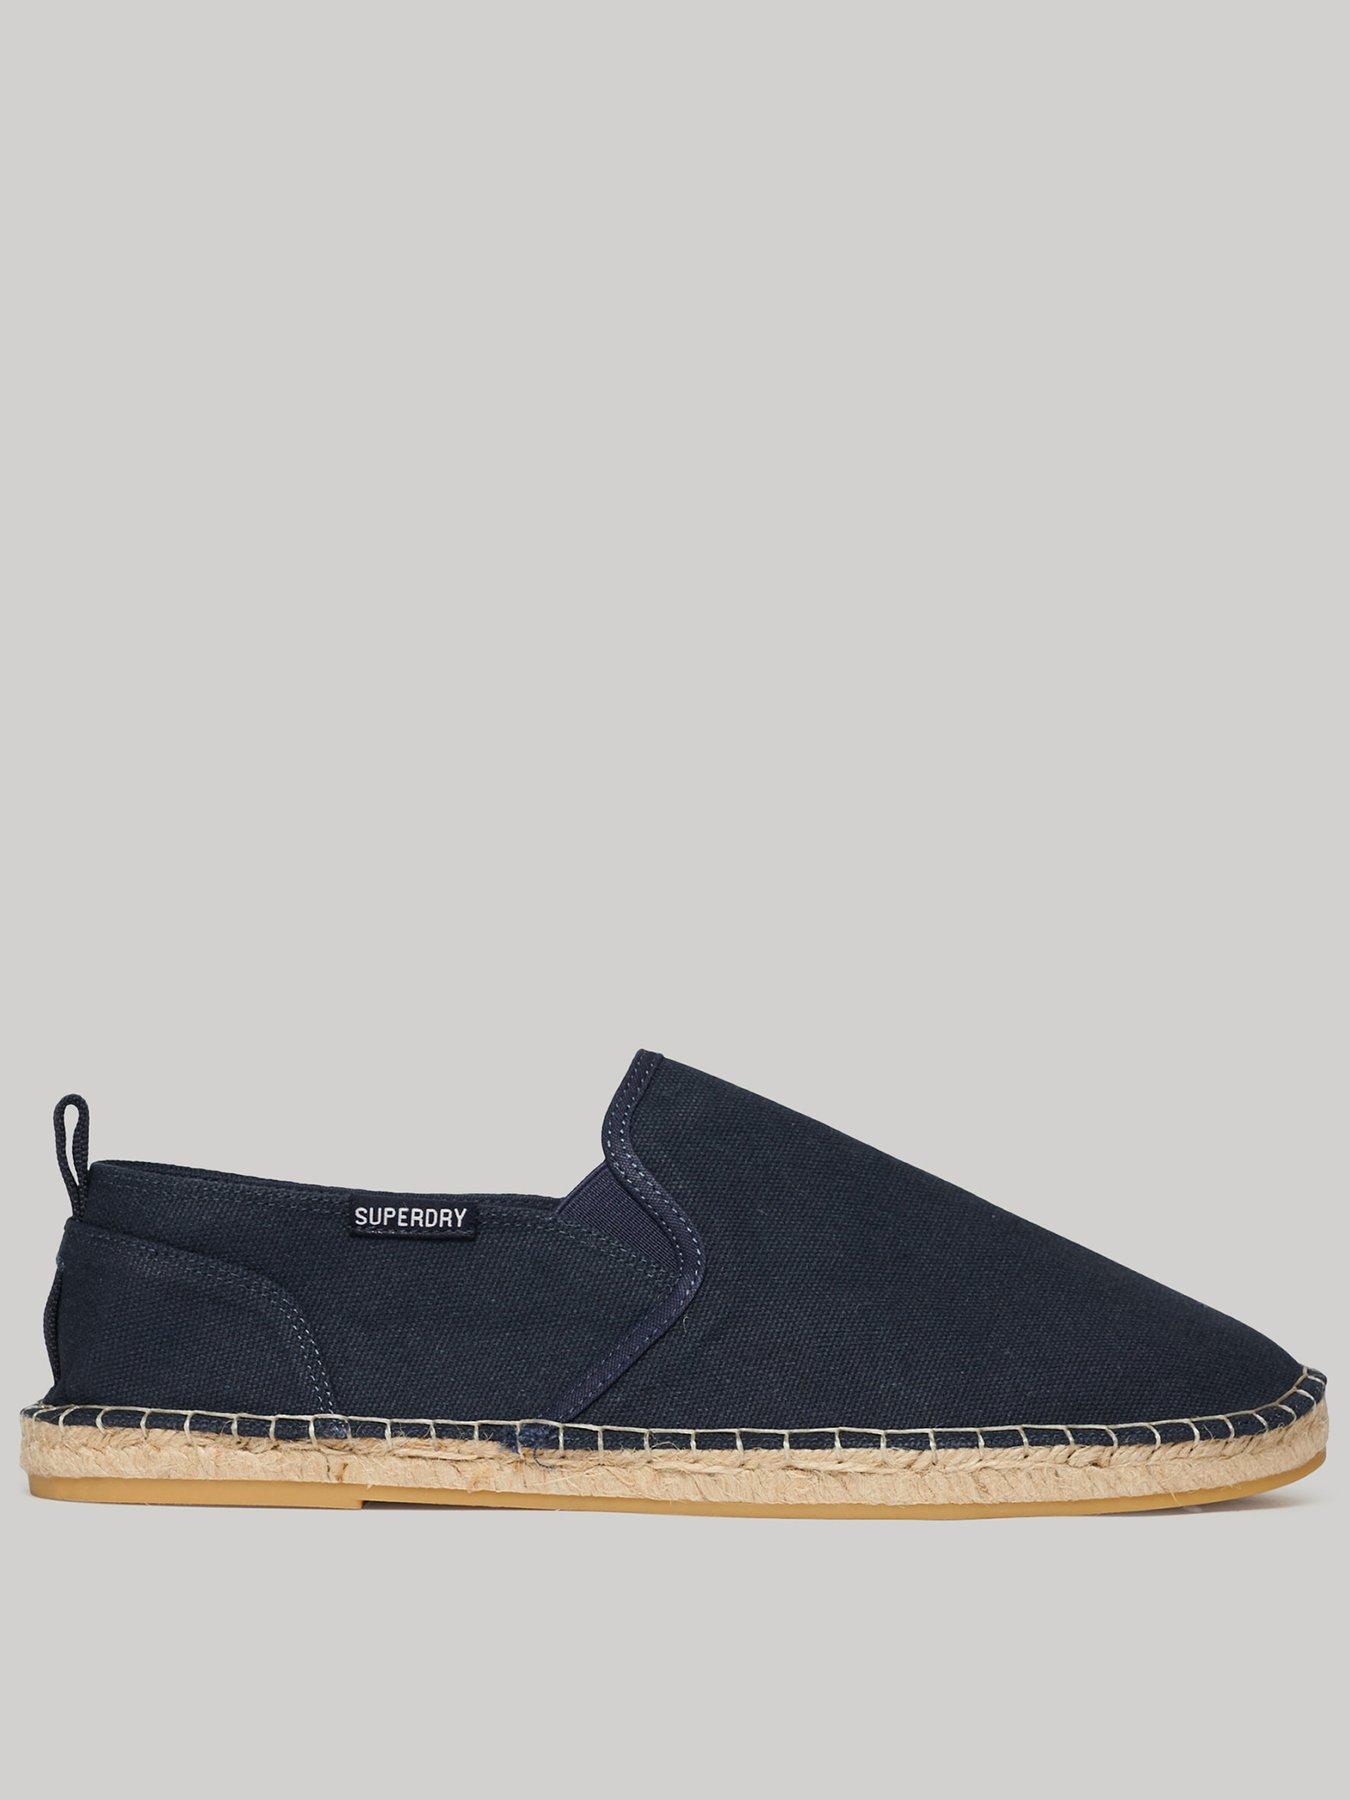 Superdry Canvas Espadrille Shoes - Navy | Very.co.uk